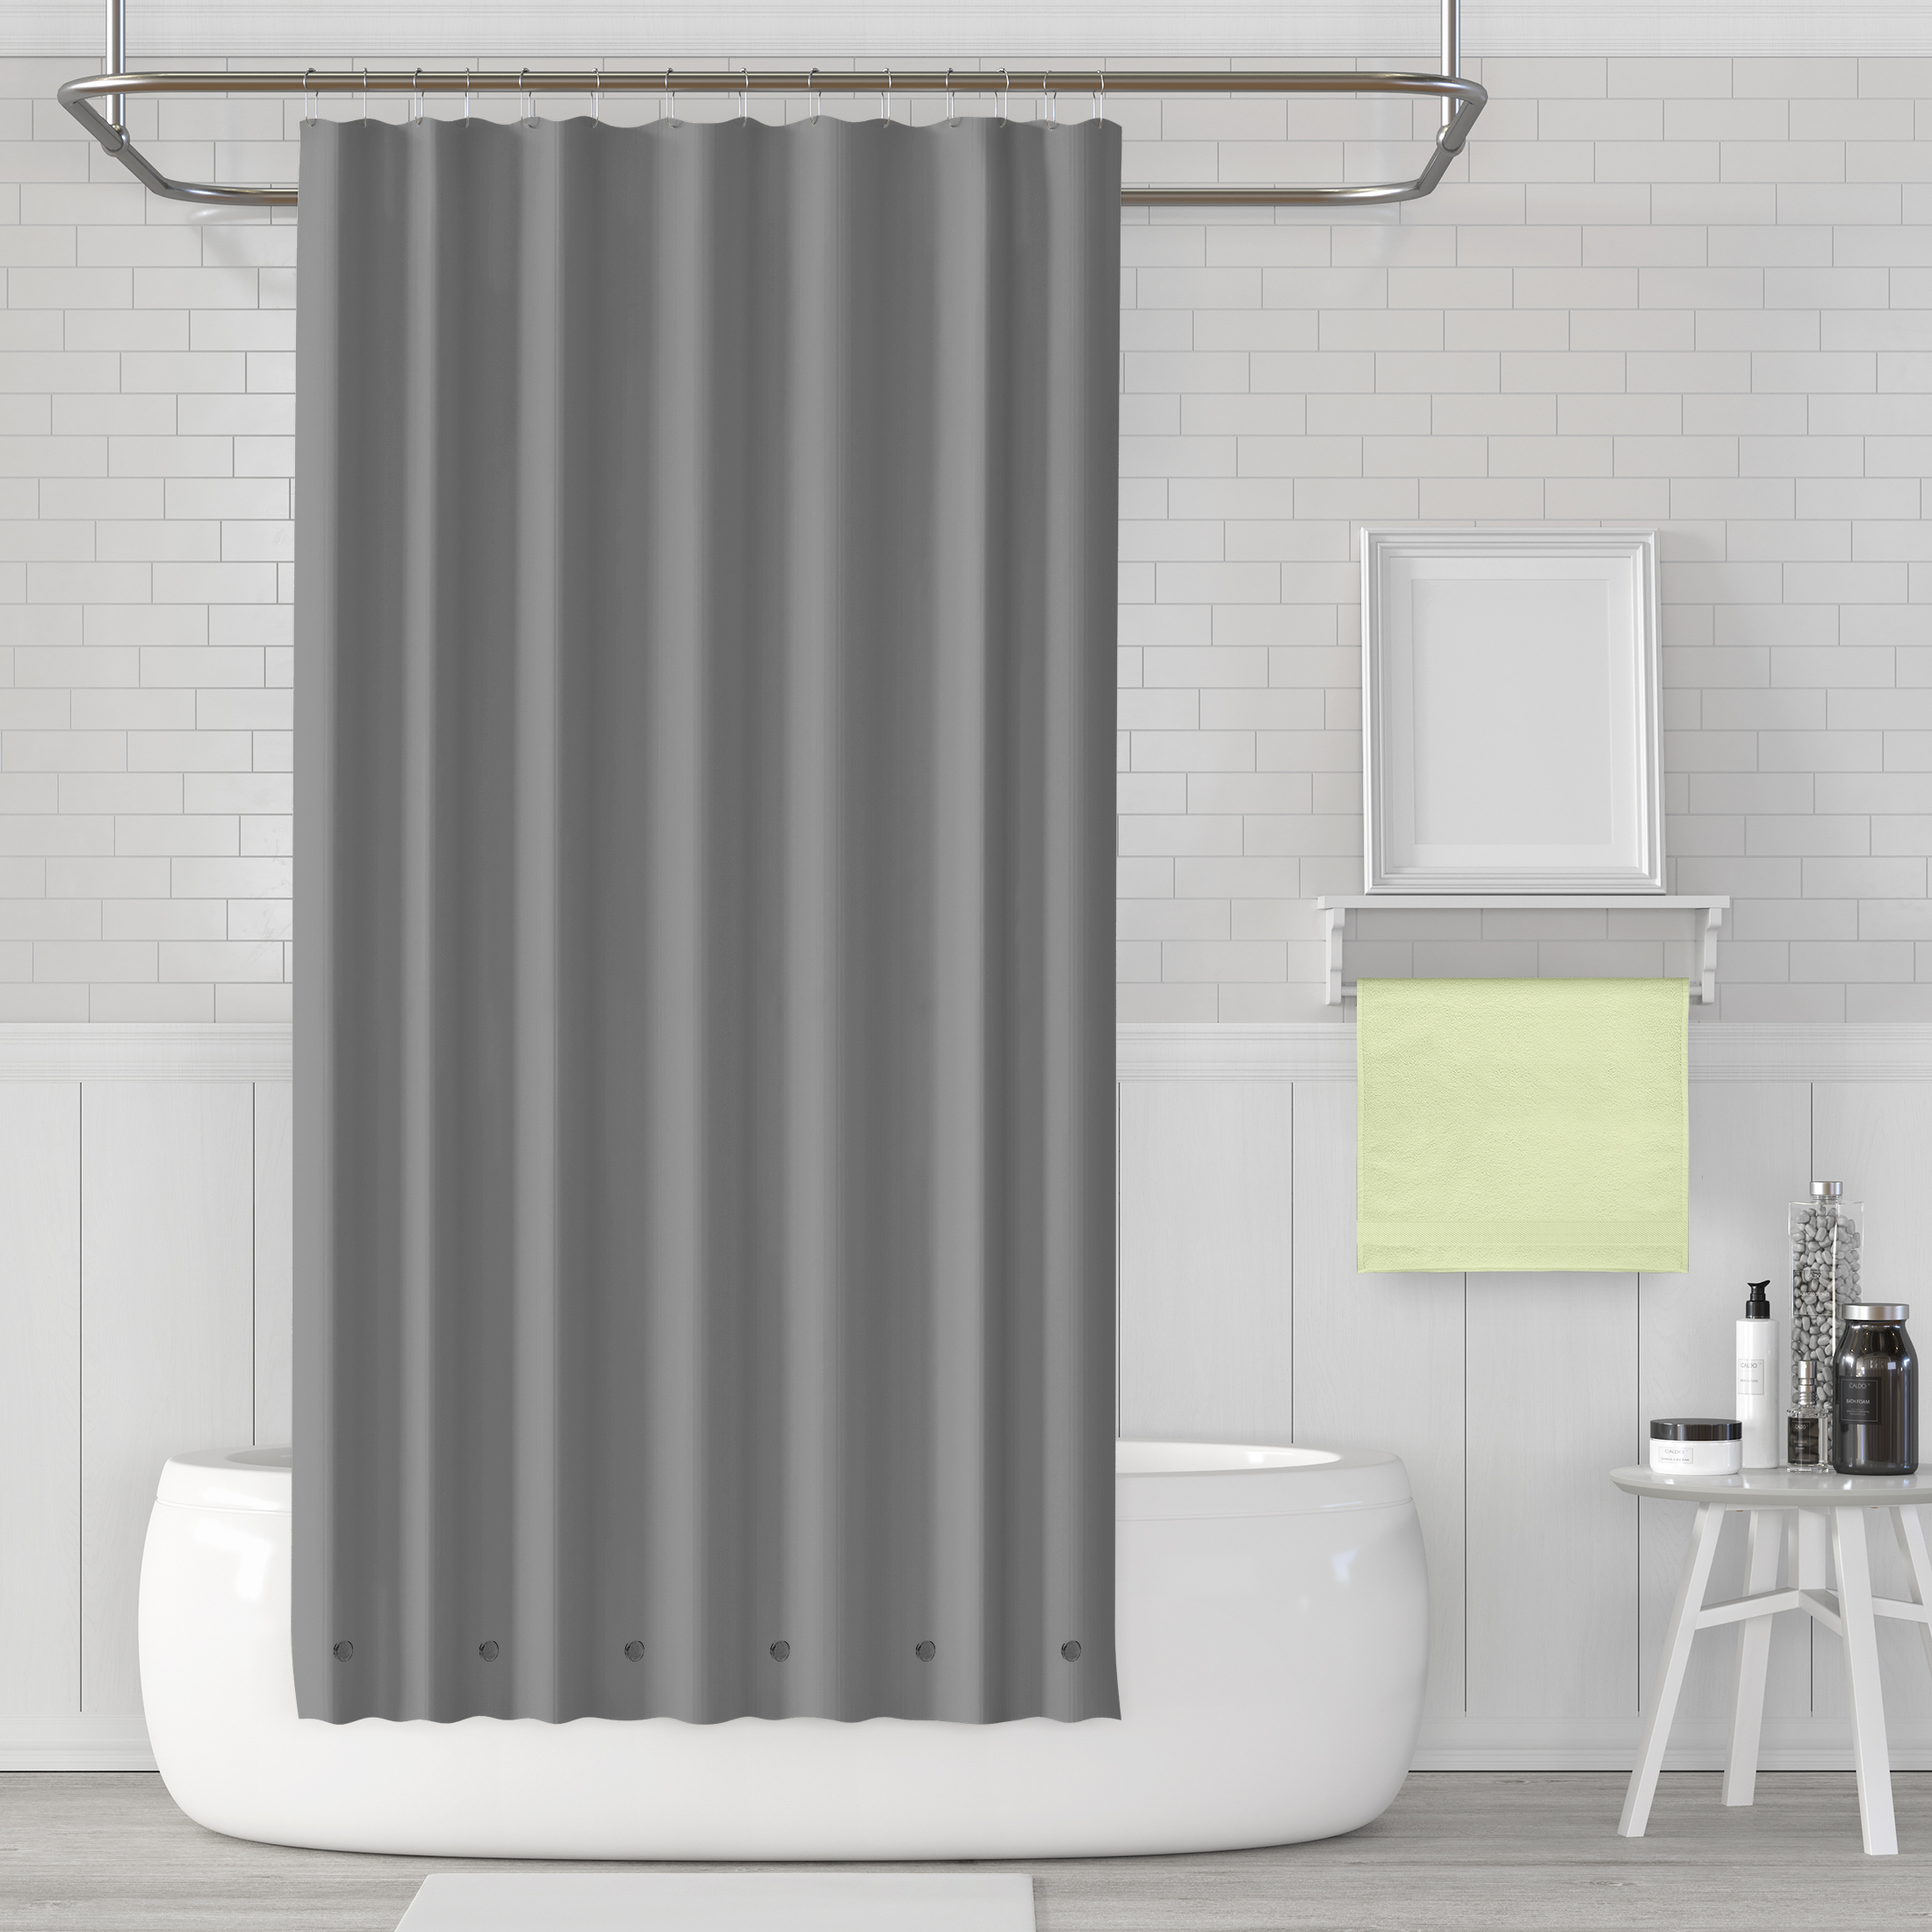 Heavy-Weight Magnetic Shower Curtain Liner - Gray